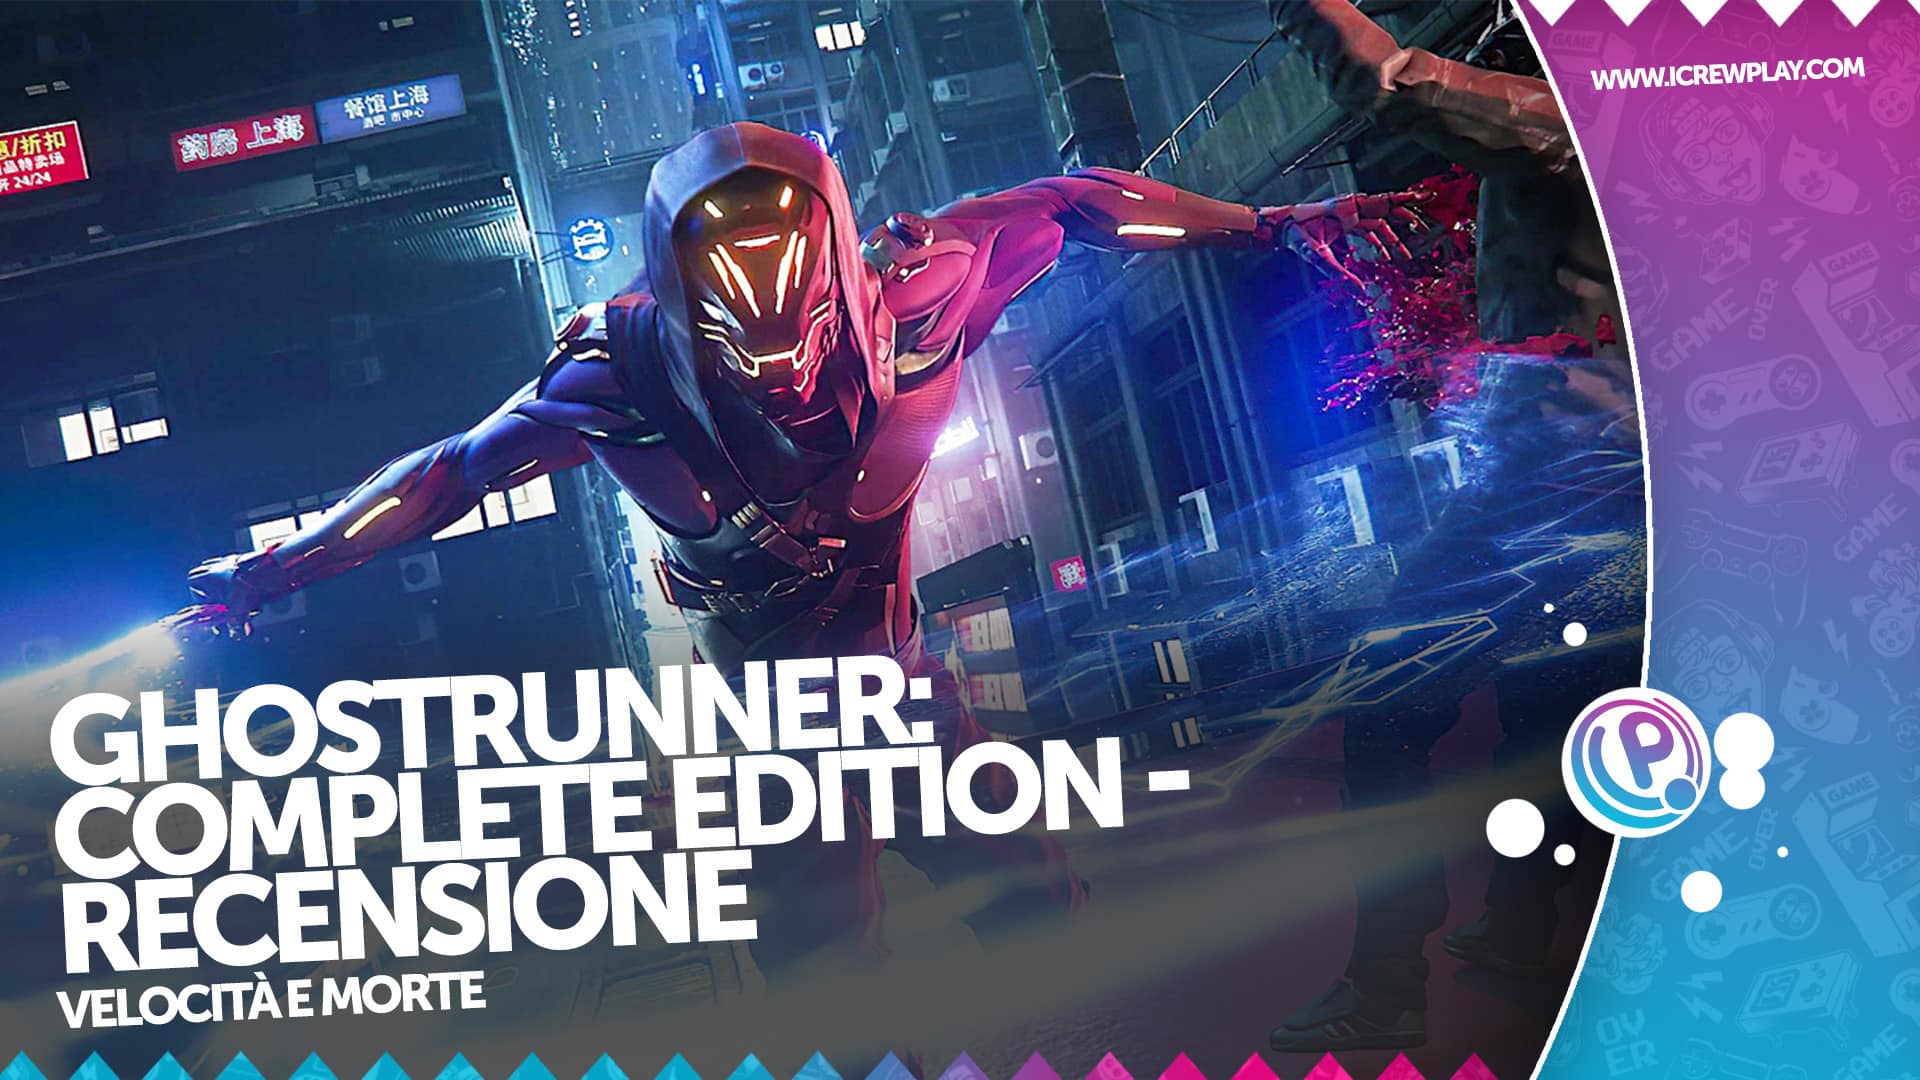 Ghostrunner: Complete Edition - Recensione per PlayStation 5 4